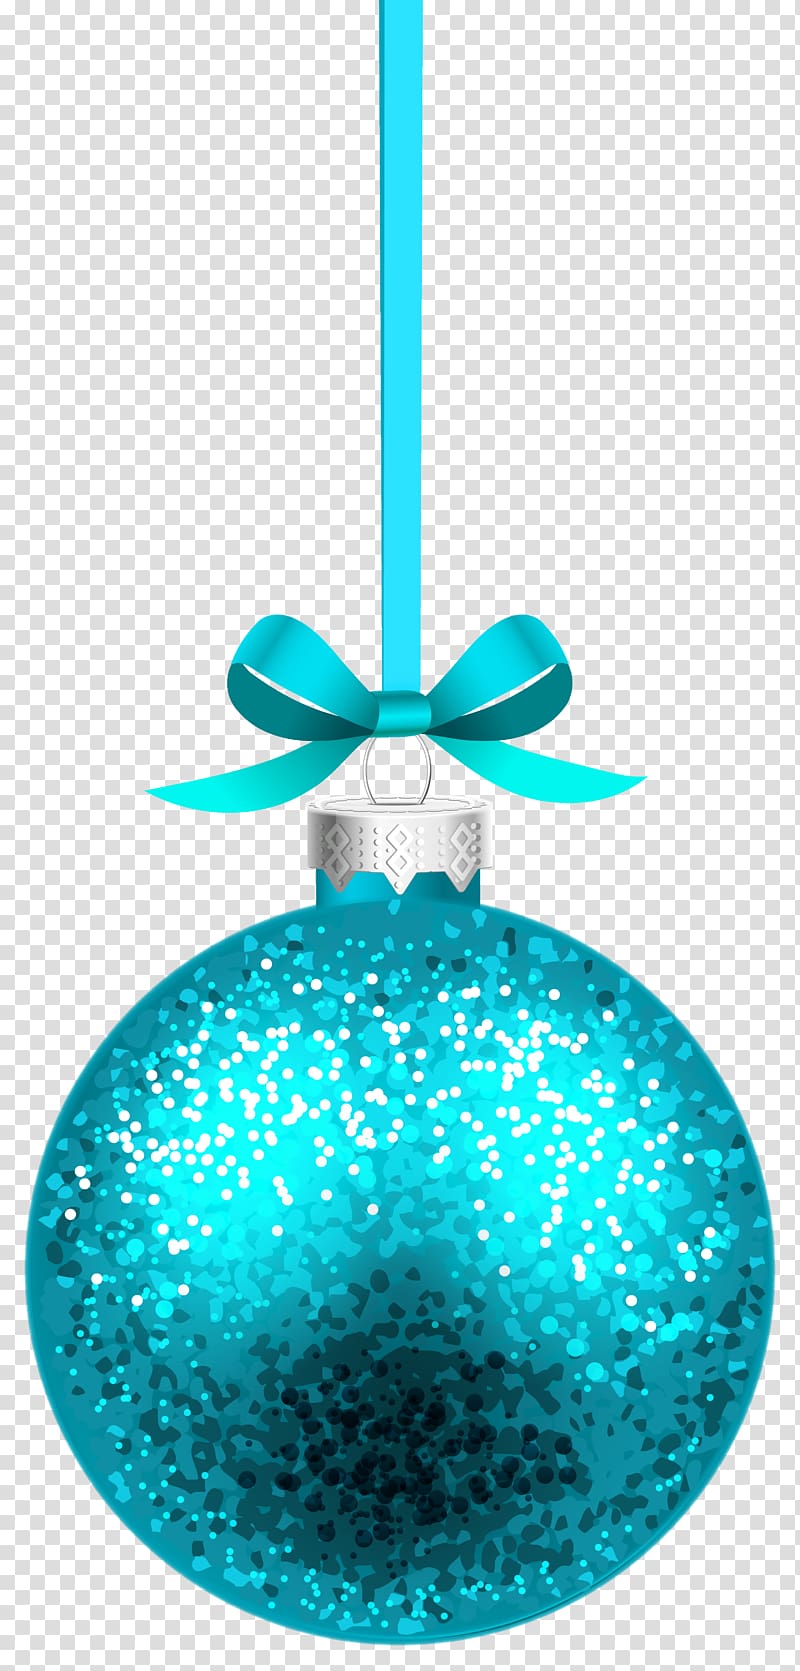 teal bauble illustration, Christmas ornament , Blue Christmas Hanging Ball transparent background PNG clipart